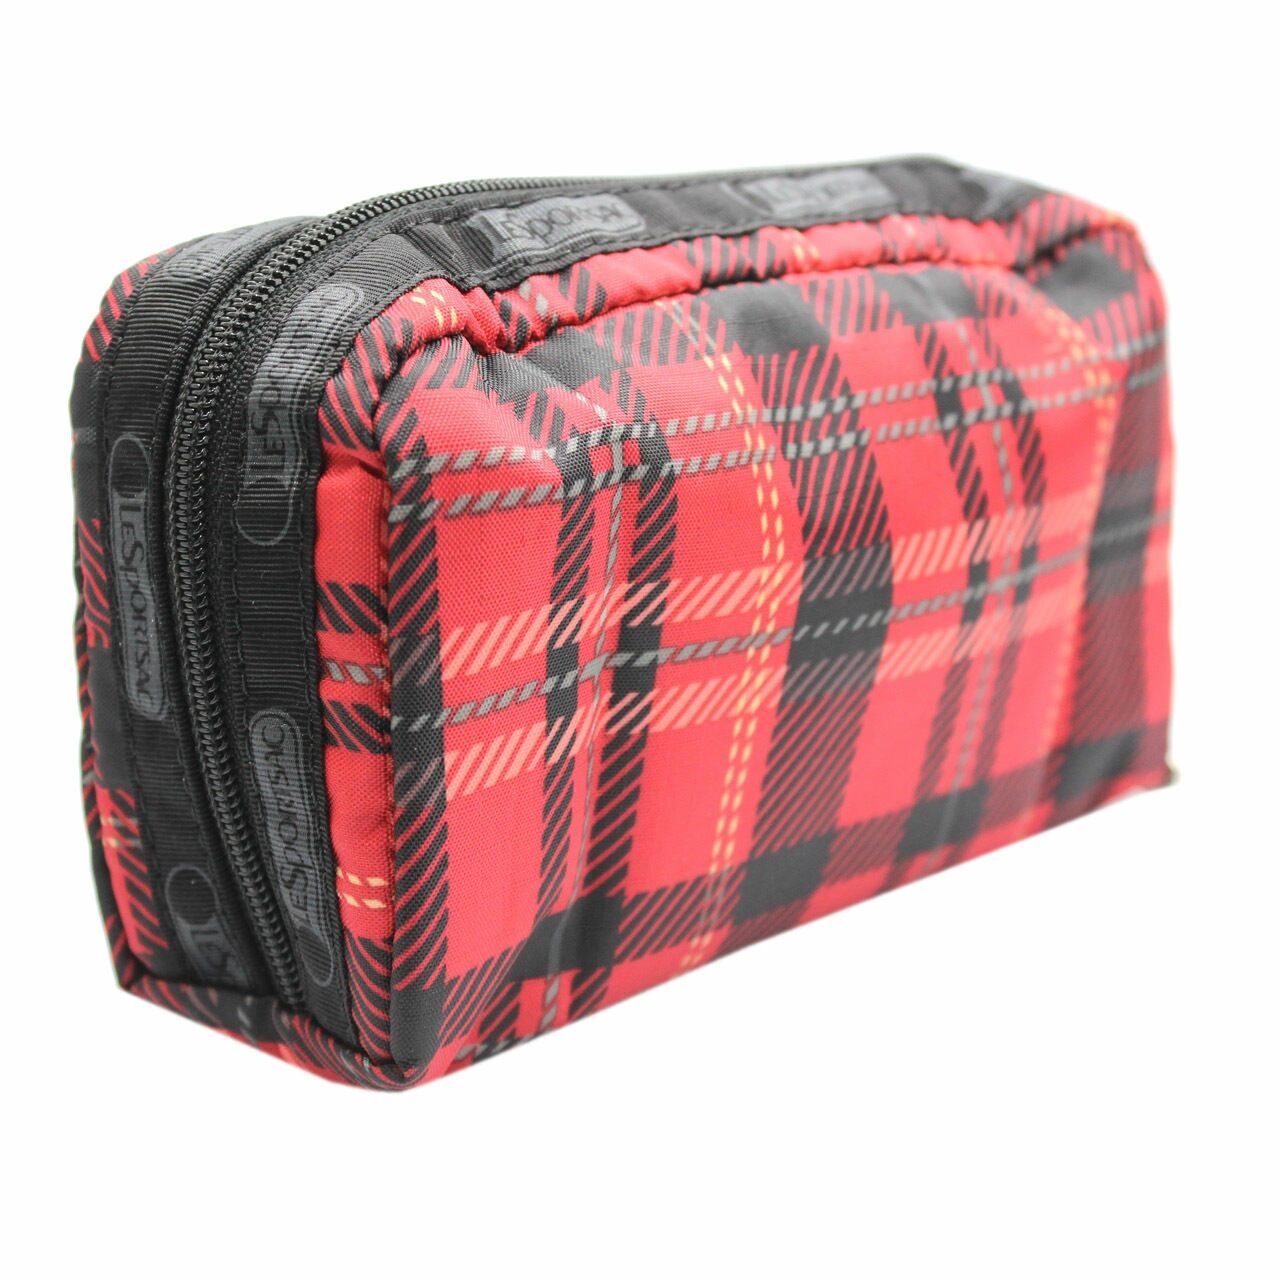 Le Sportsac Red & Black Pouch